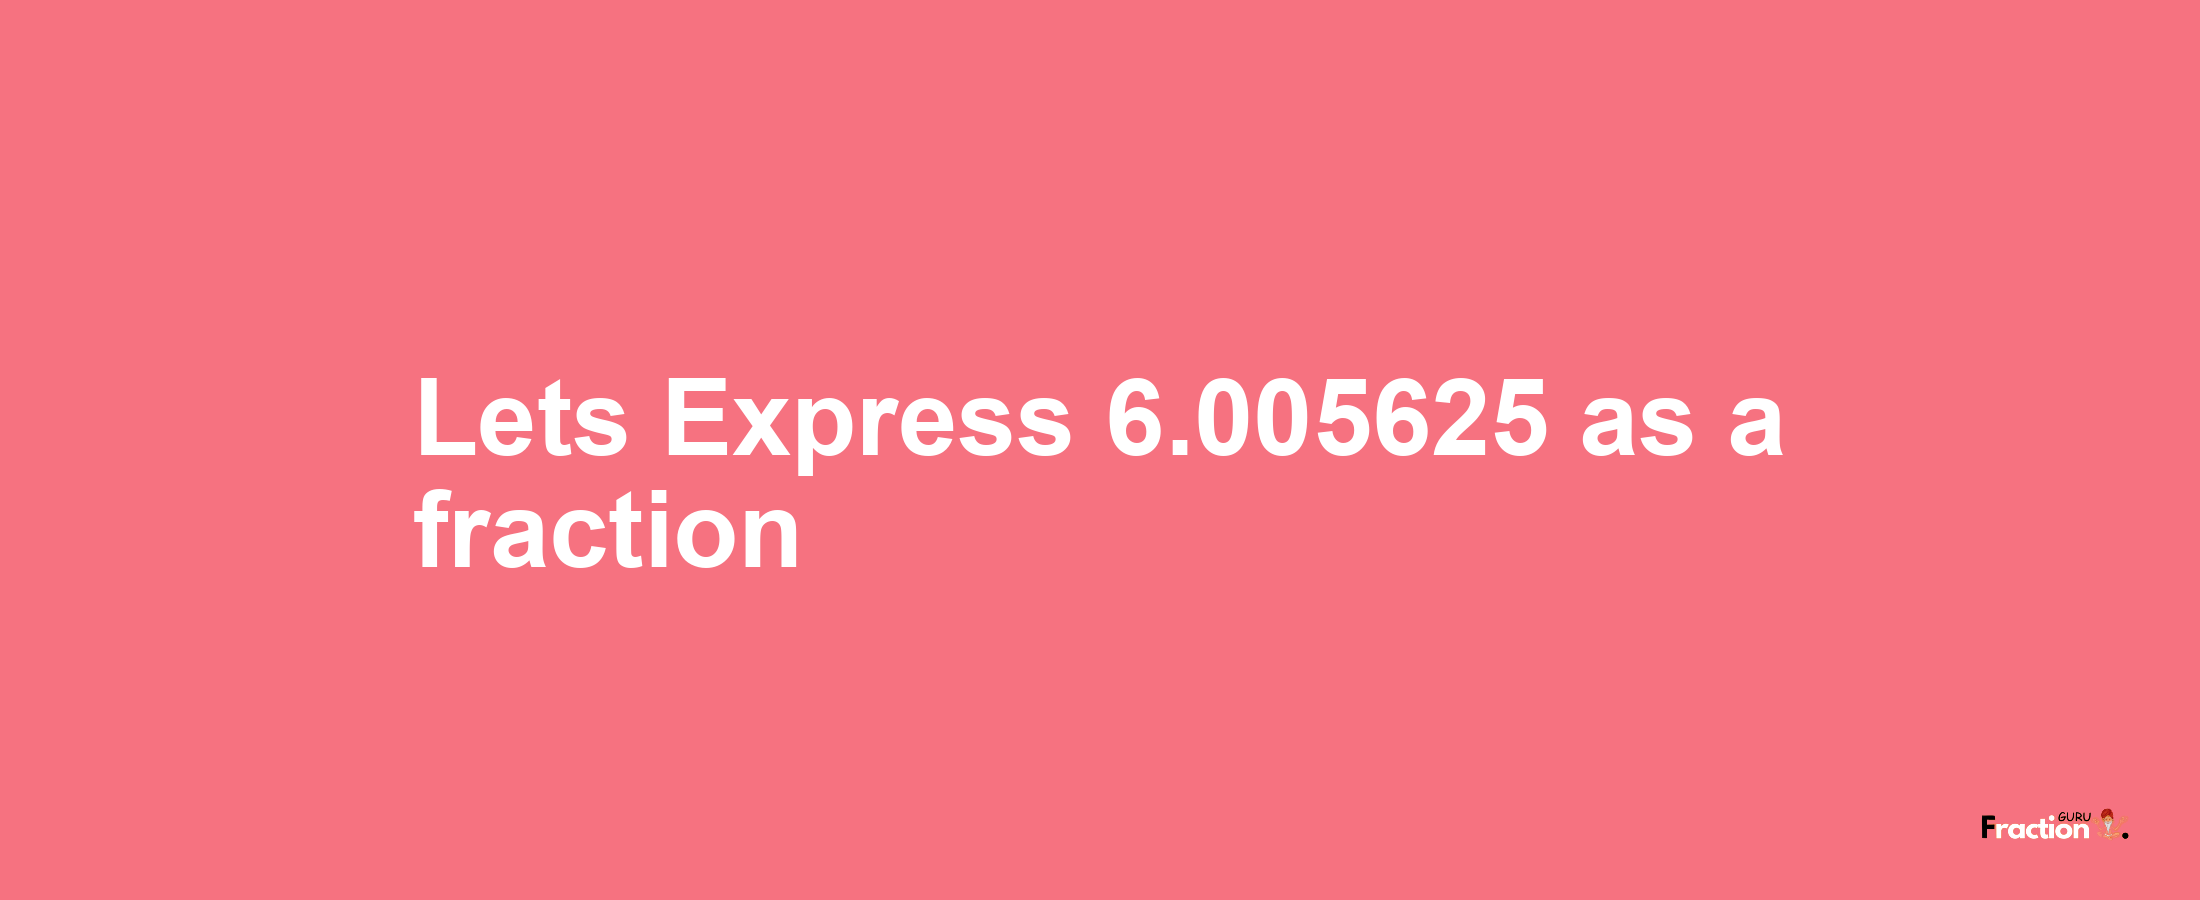 Lets Express 6.005625 as afraction